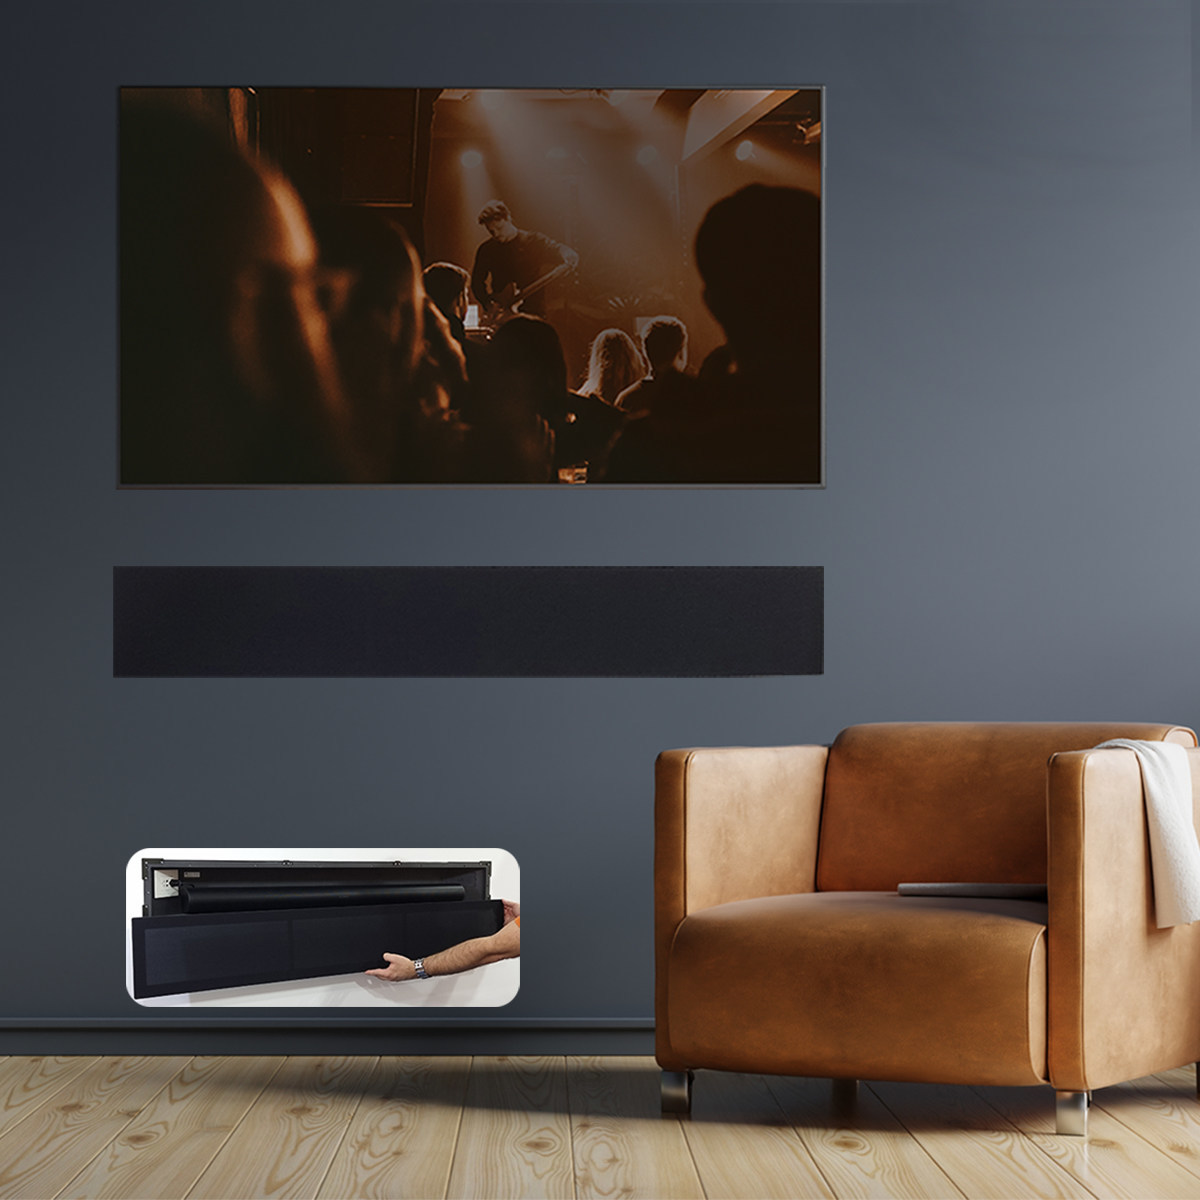 WALL-SMART Launches New Wall Mounts for Discreet Installations of Sonos Soundbars